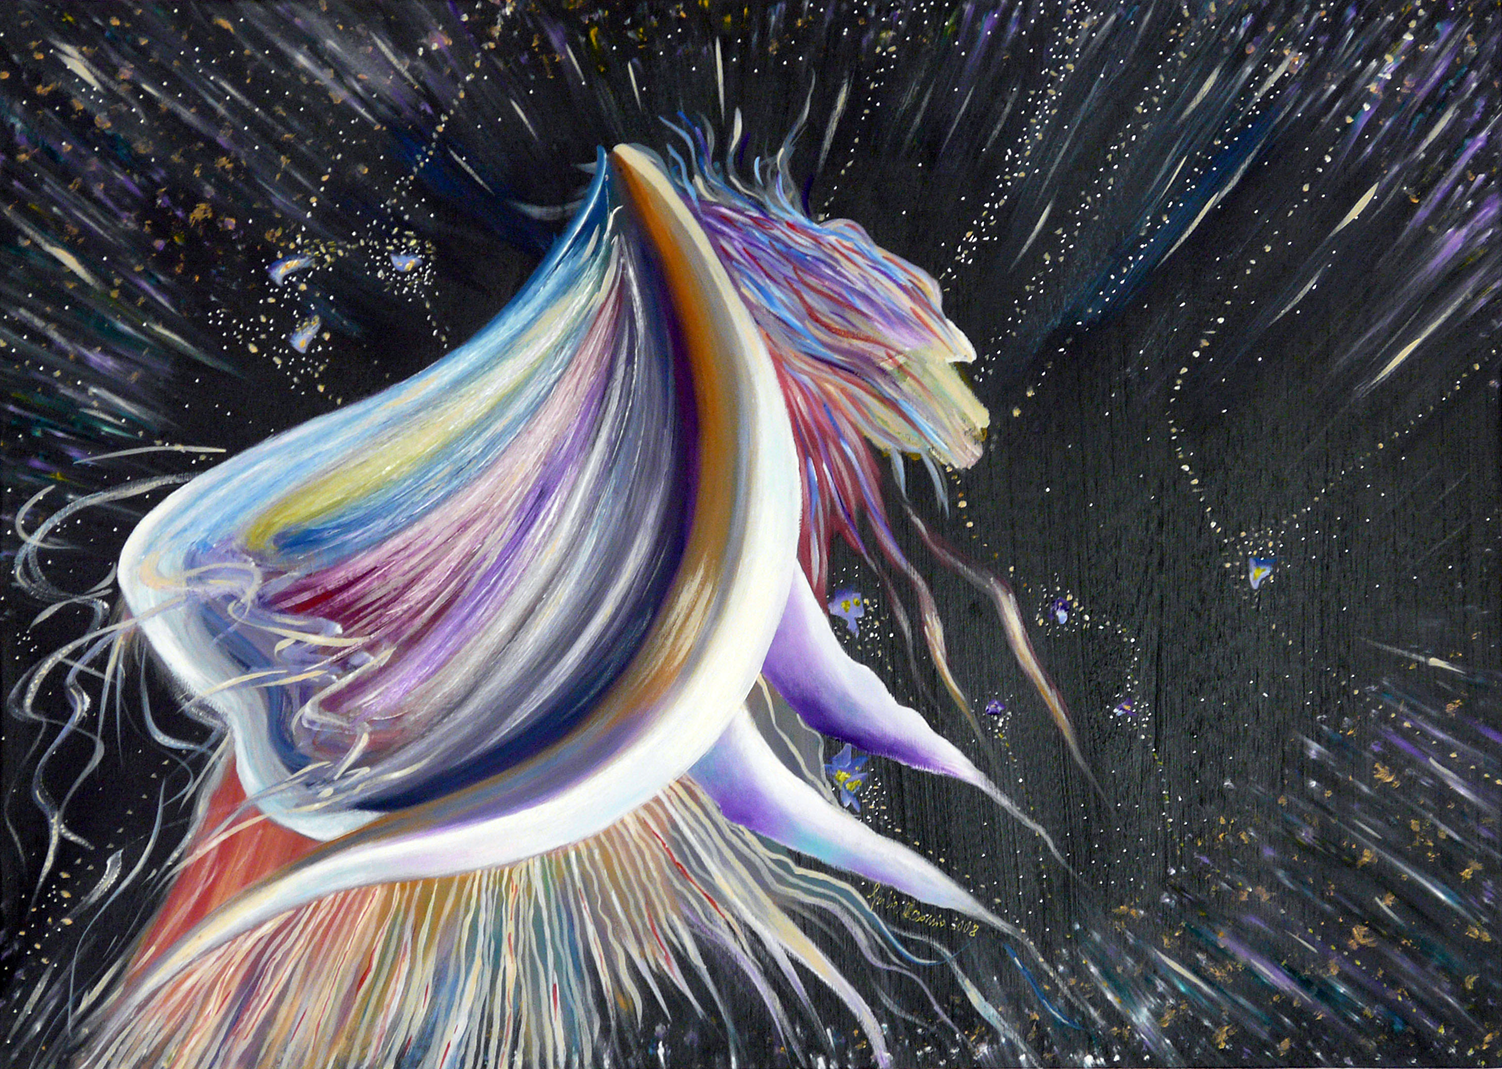 The Liuba galaxy (Paint inspired by poetry by Giulia Occorsio)